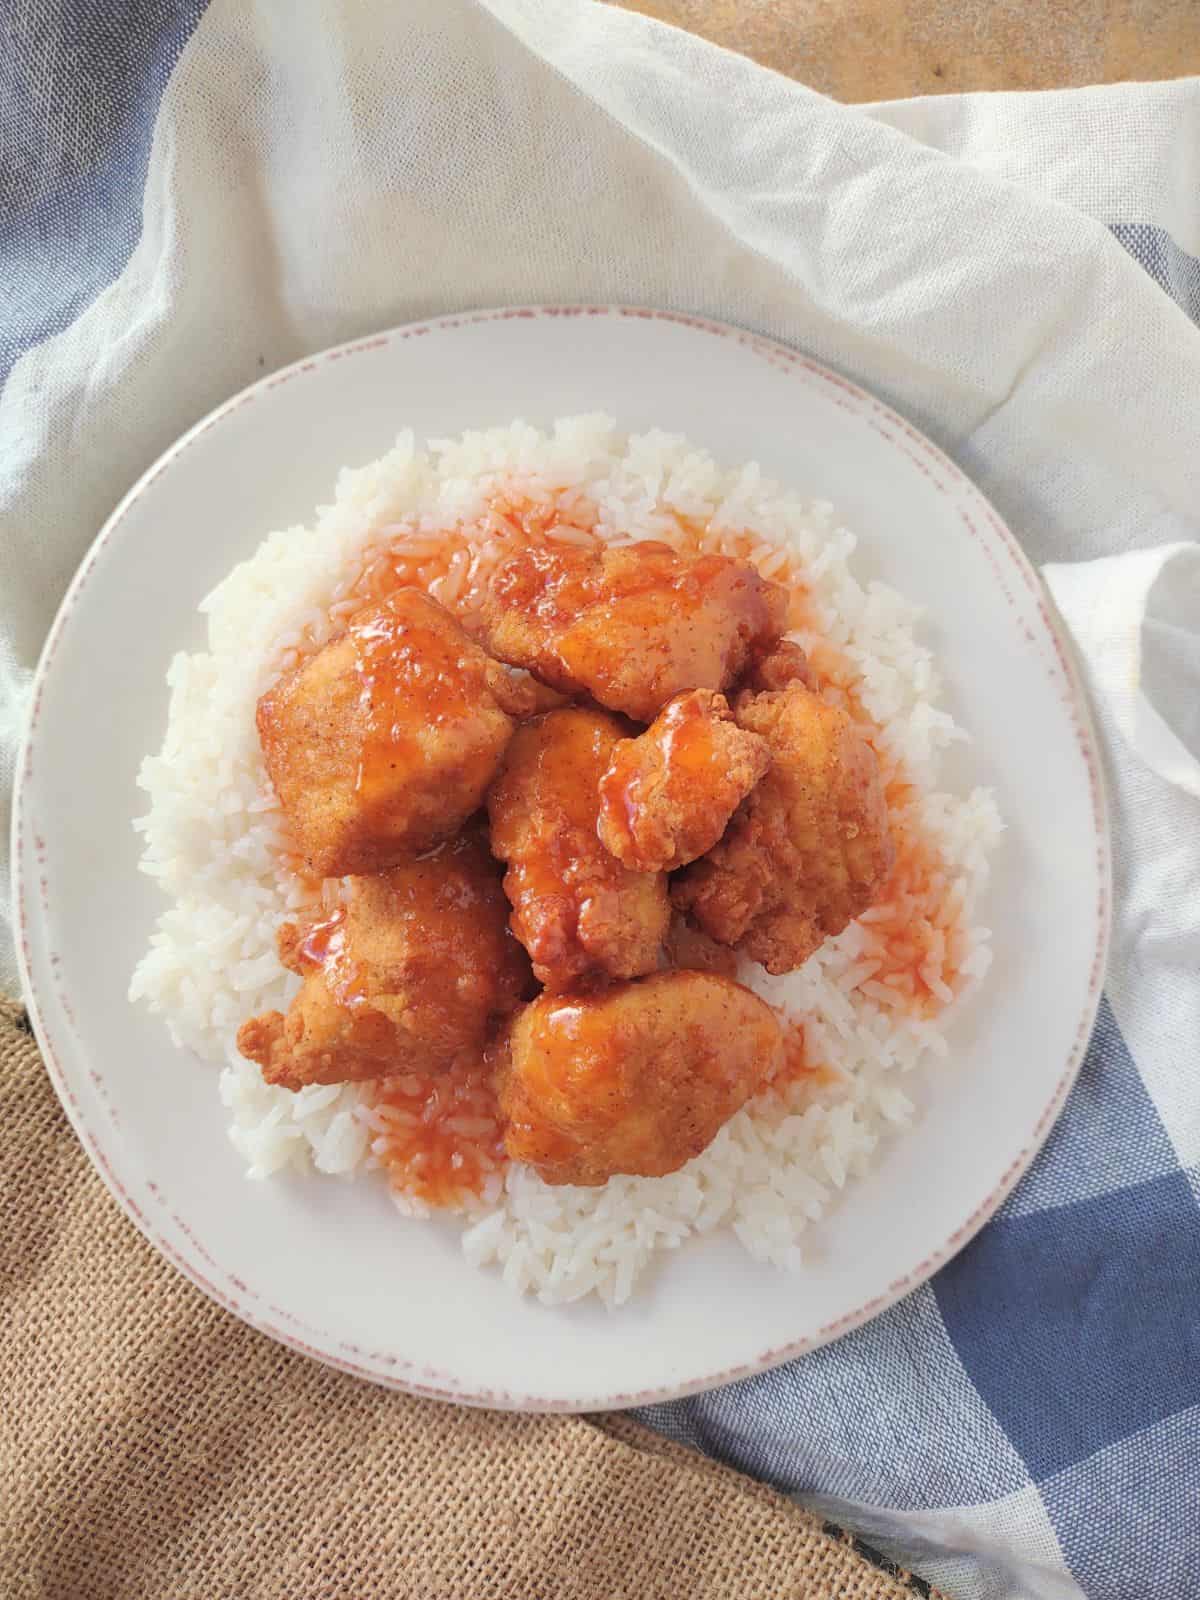 Kirkland Lightly Breaded Chicken Breast Chunks over top of white Jasmine rice and topped with a sweet & sour sauce.